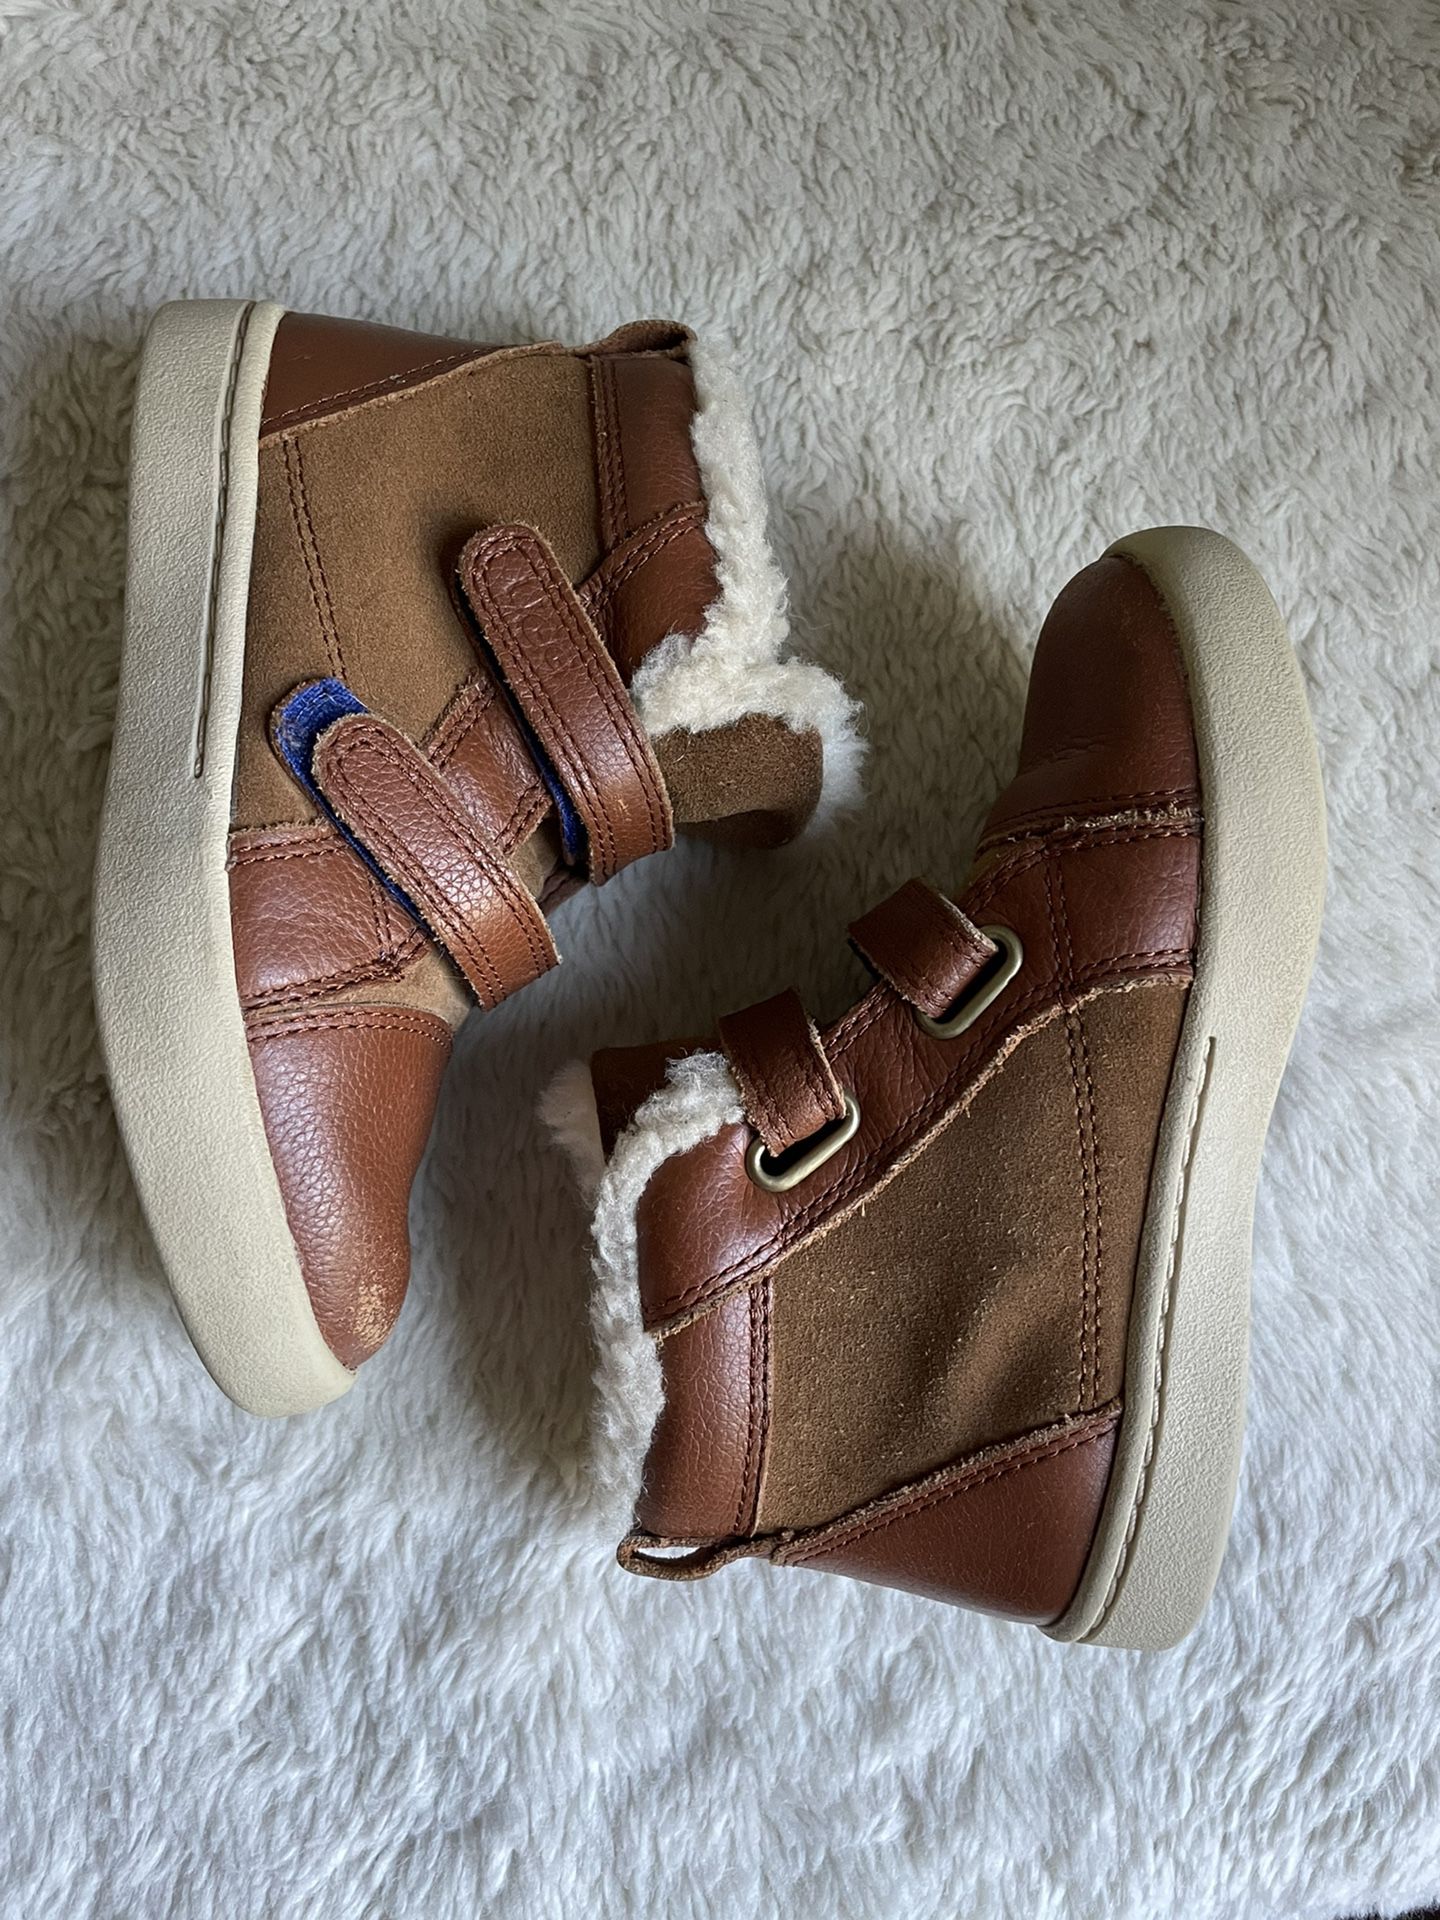 UGG Rennon II Boots Chestnut Boys 10 Toddler Kids Brown Shoes High Tops Boots 